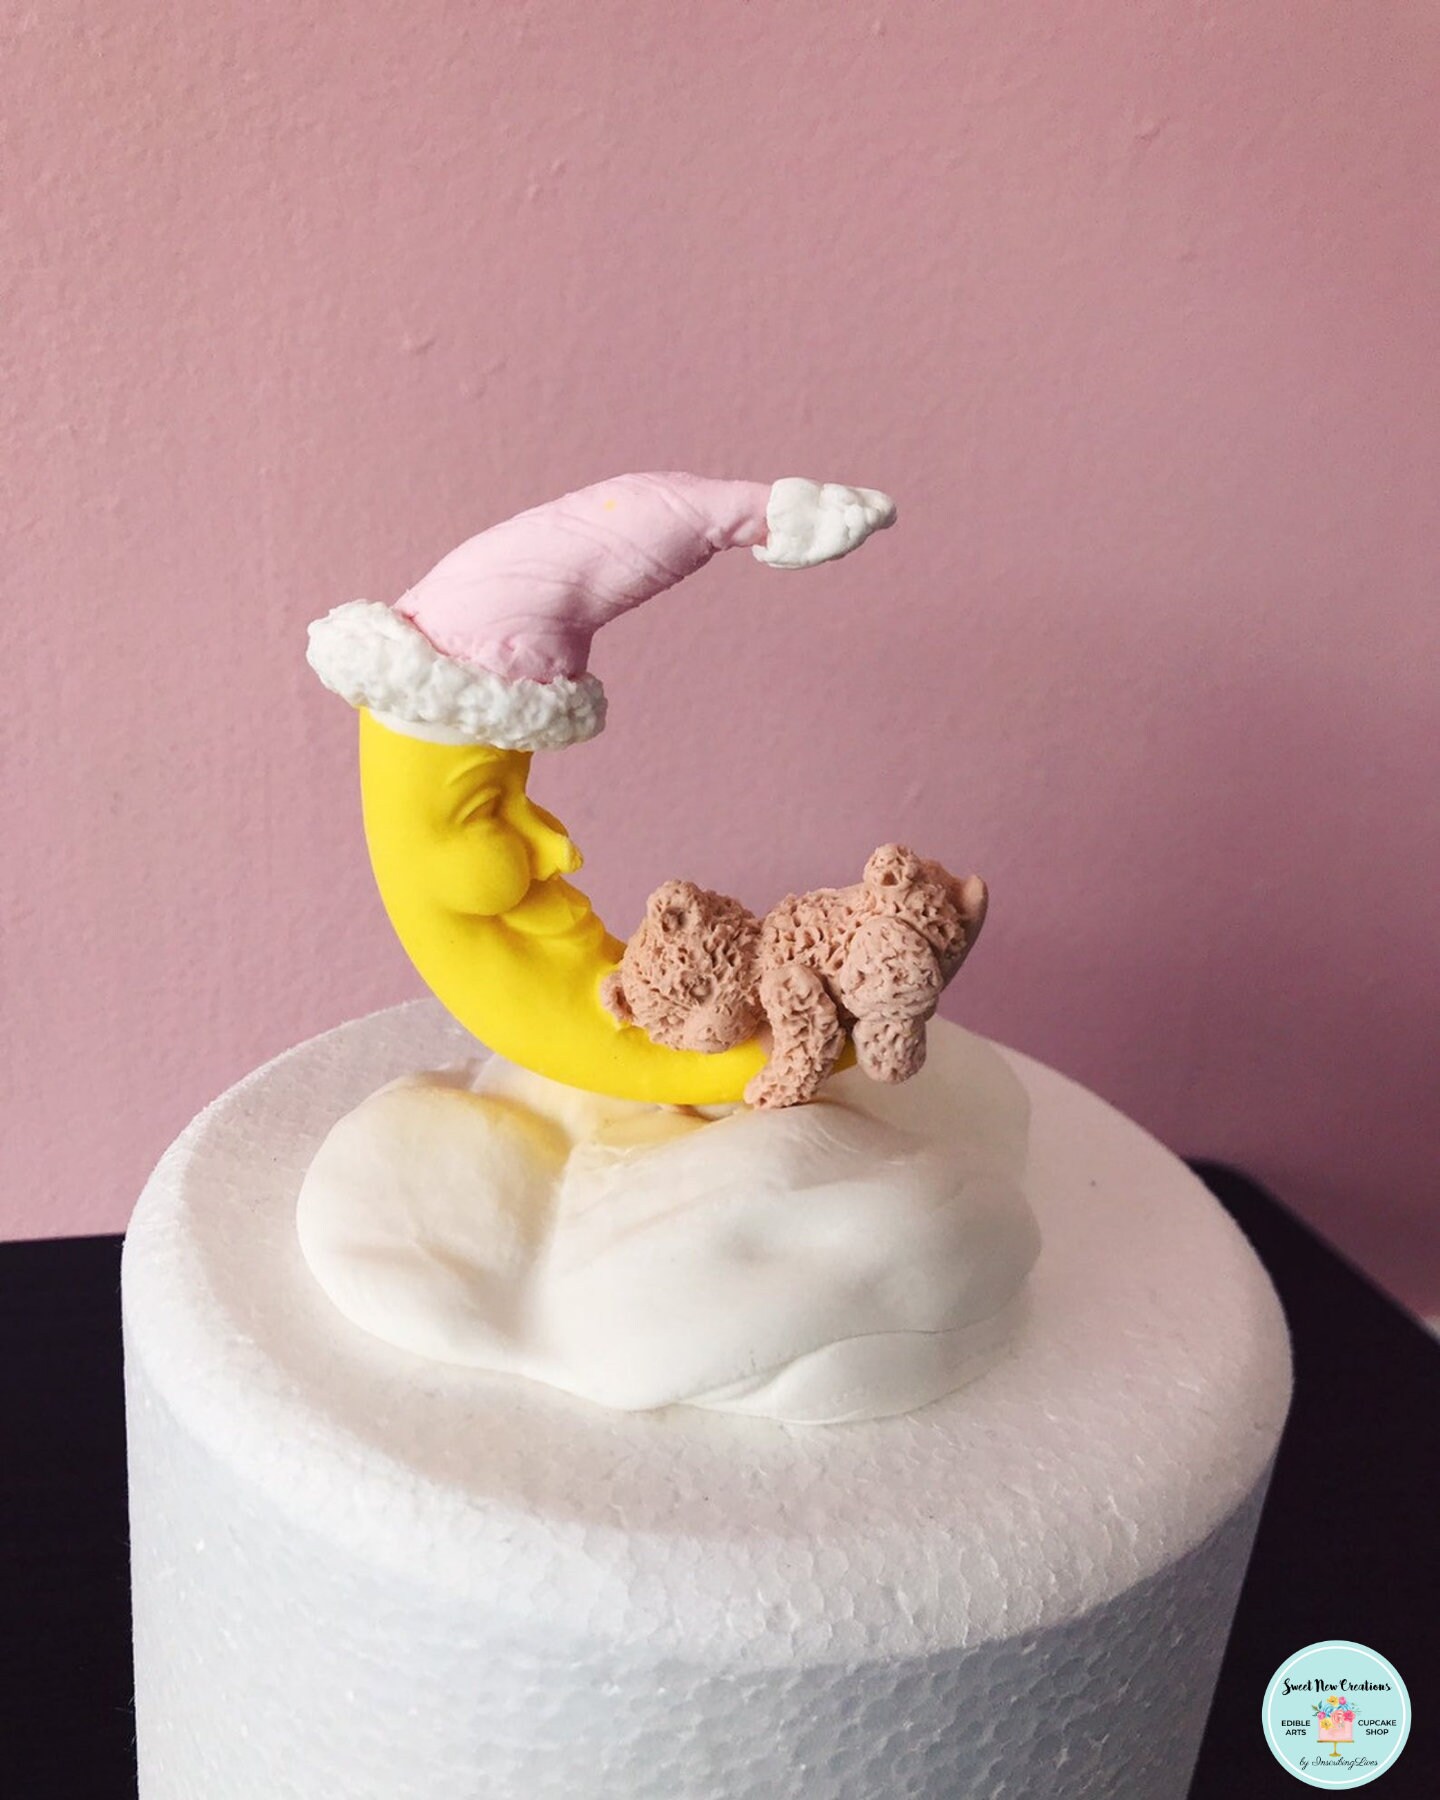 Fondant Sleeping Bear on Moon Cake Topper-Baby Shower Cake Topper-First  Birthday Cake Topper oh baby party decorations